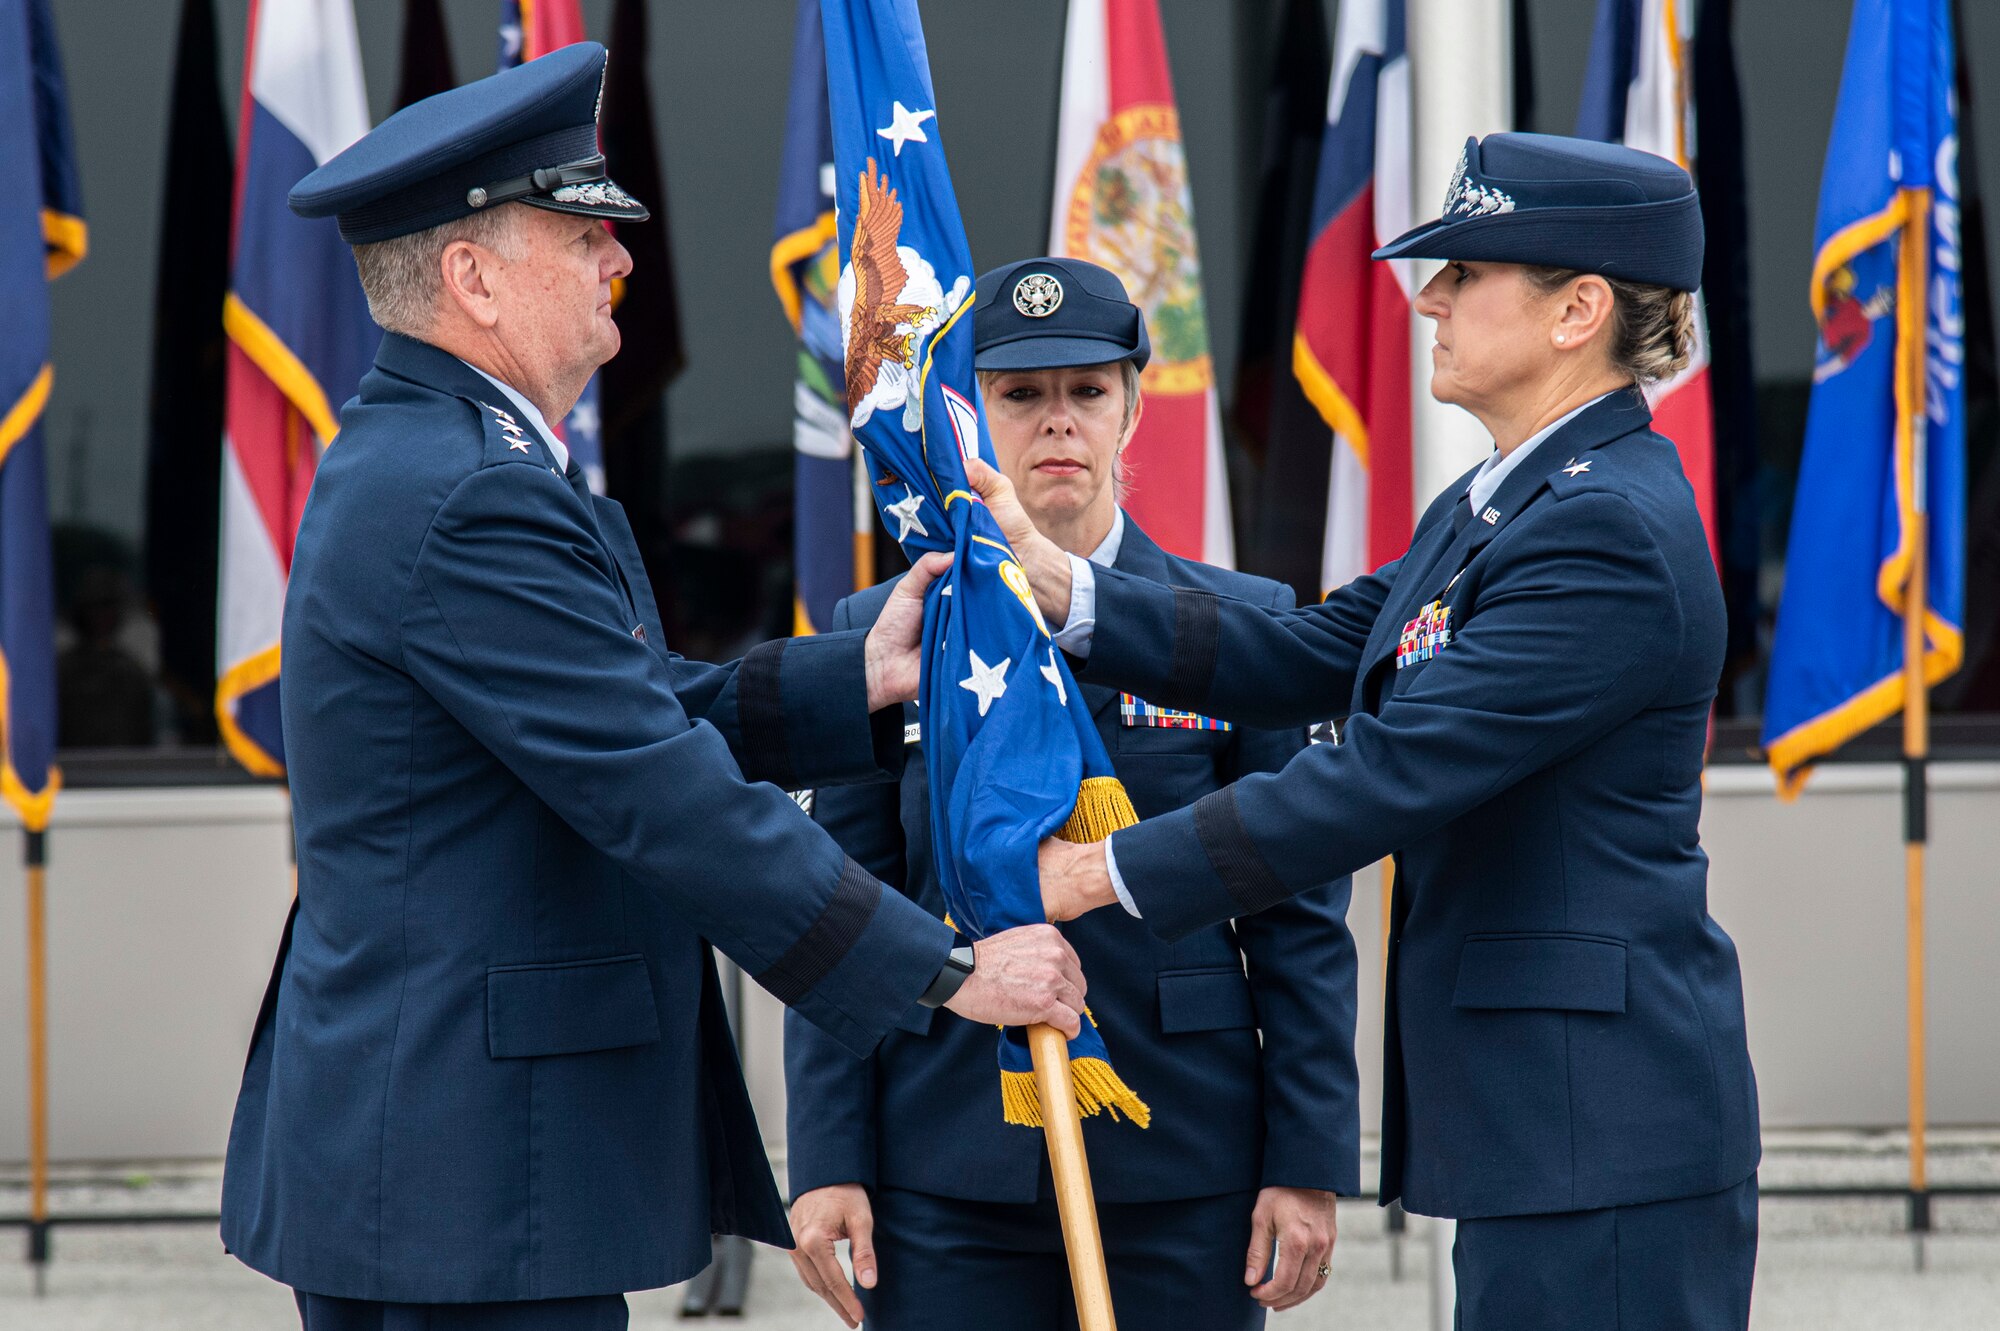 502nd Air Base Wing, Joint Base San Antonio welcome new commander